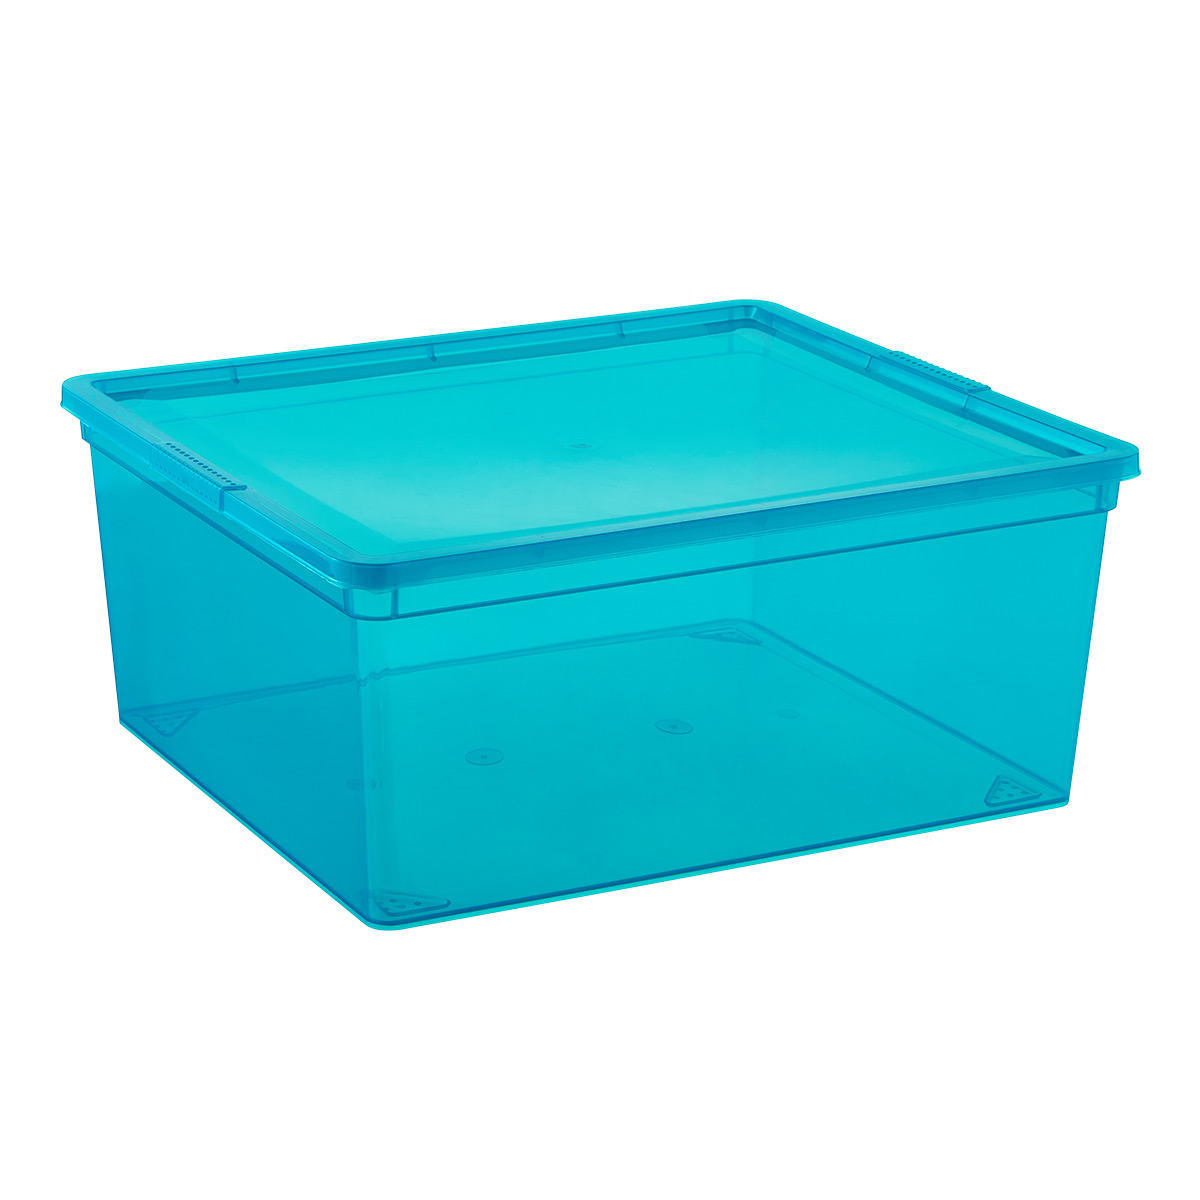 https://www.containerstore.com/catalogimages/434130/10085546_large_our_tidy_box_peacock.jpg